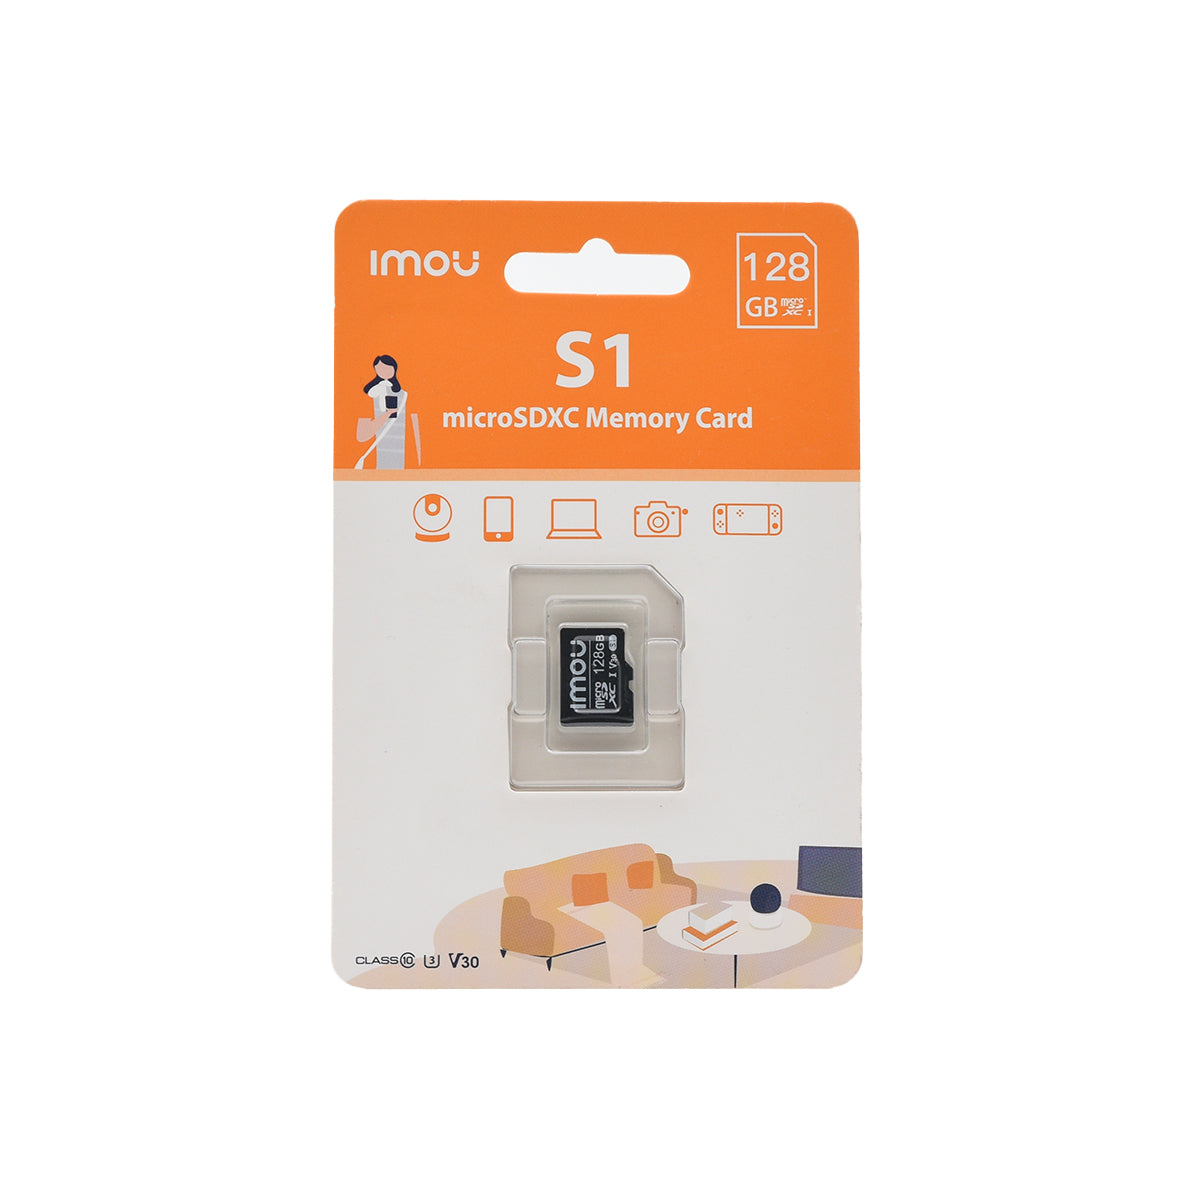 Imou 128GB Micro SDXC Surveillance Memory Card ST2-128-S1 Packaging View CH47-2